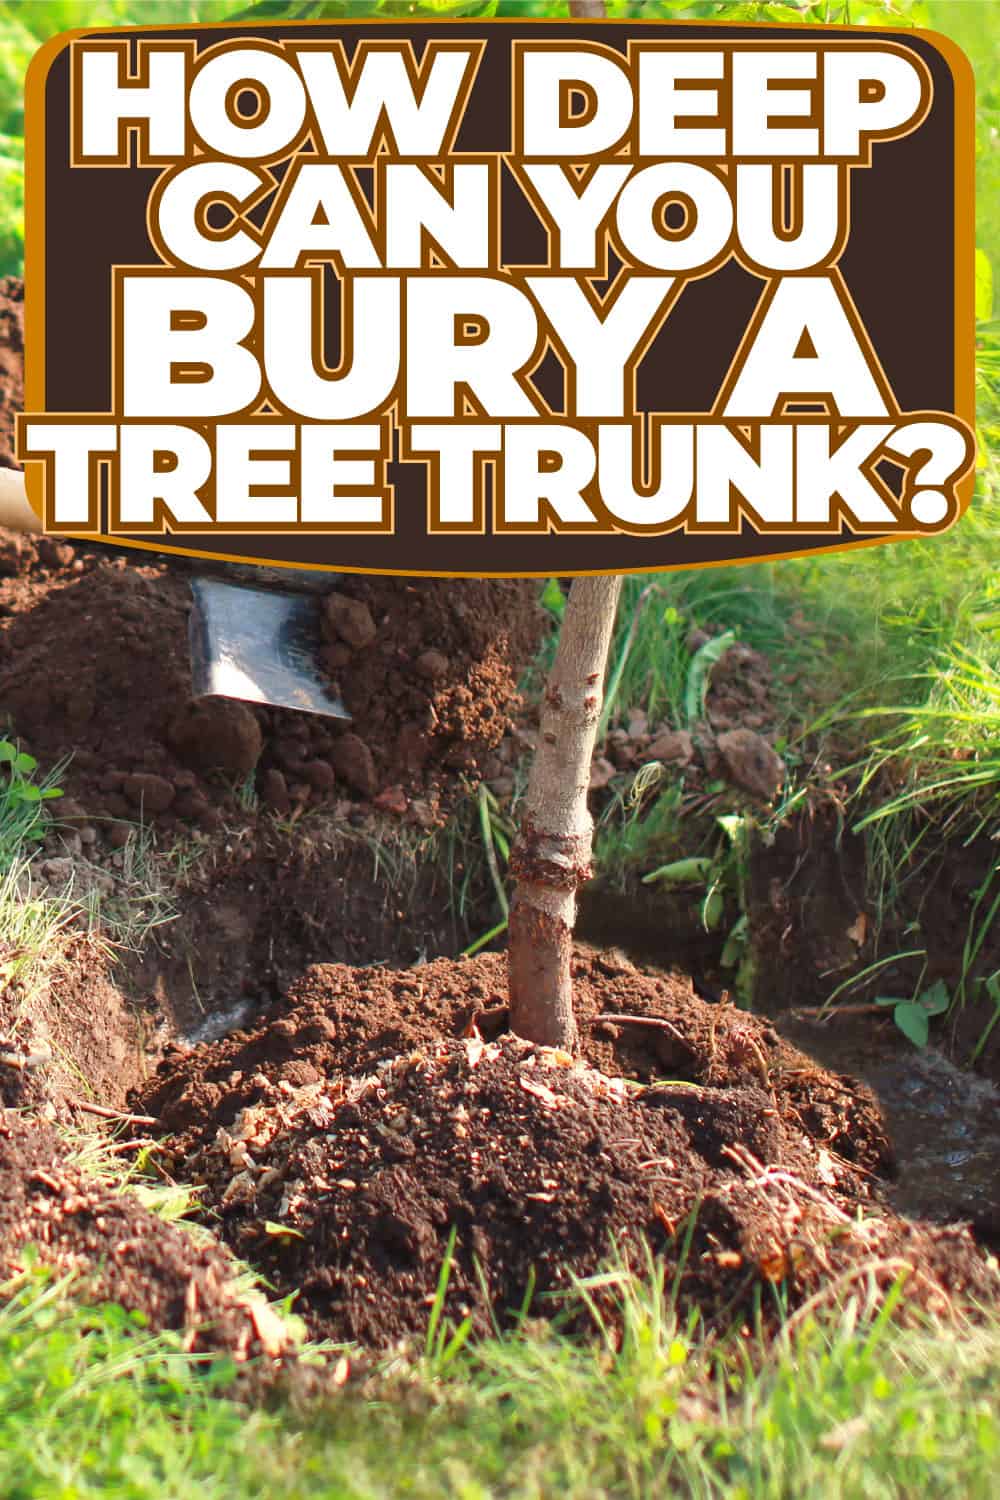 How Deep Can You Bury A Tree Trunk?